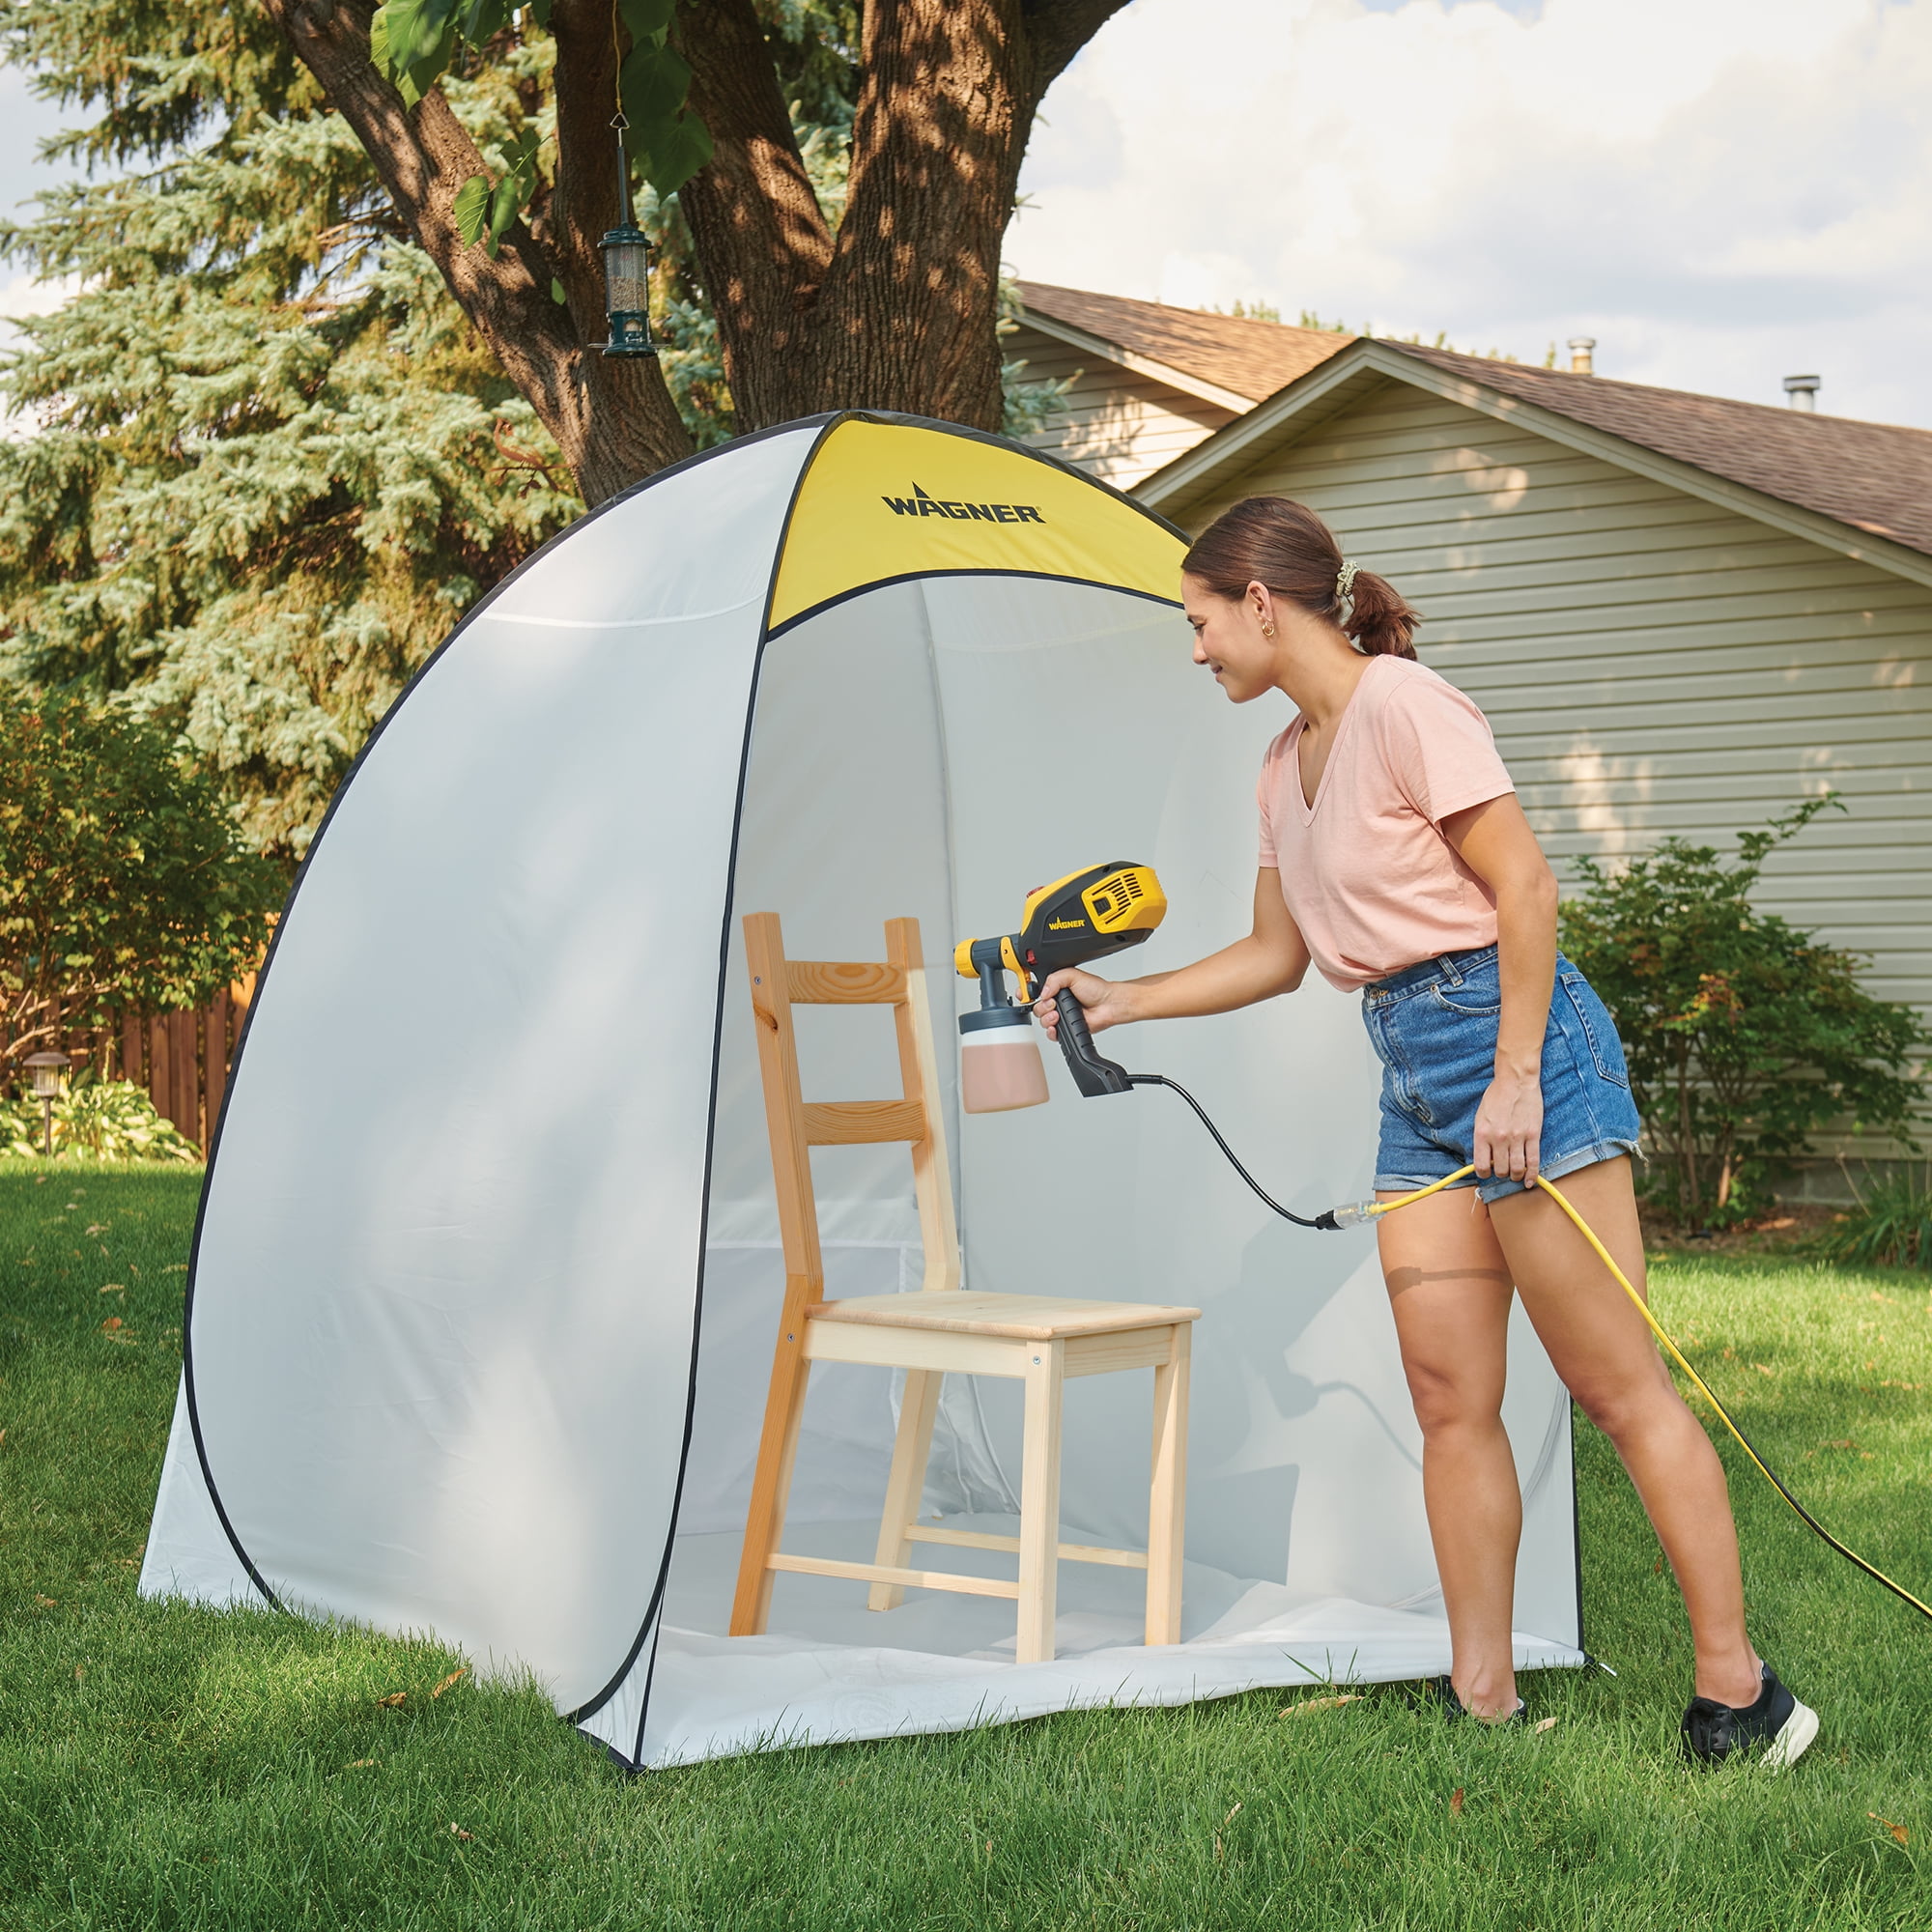 Wagner Large Spray Shelter with Floor & Screen - Portable Paint Booth for  DIY Spray Painting